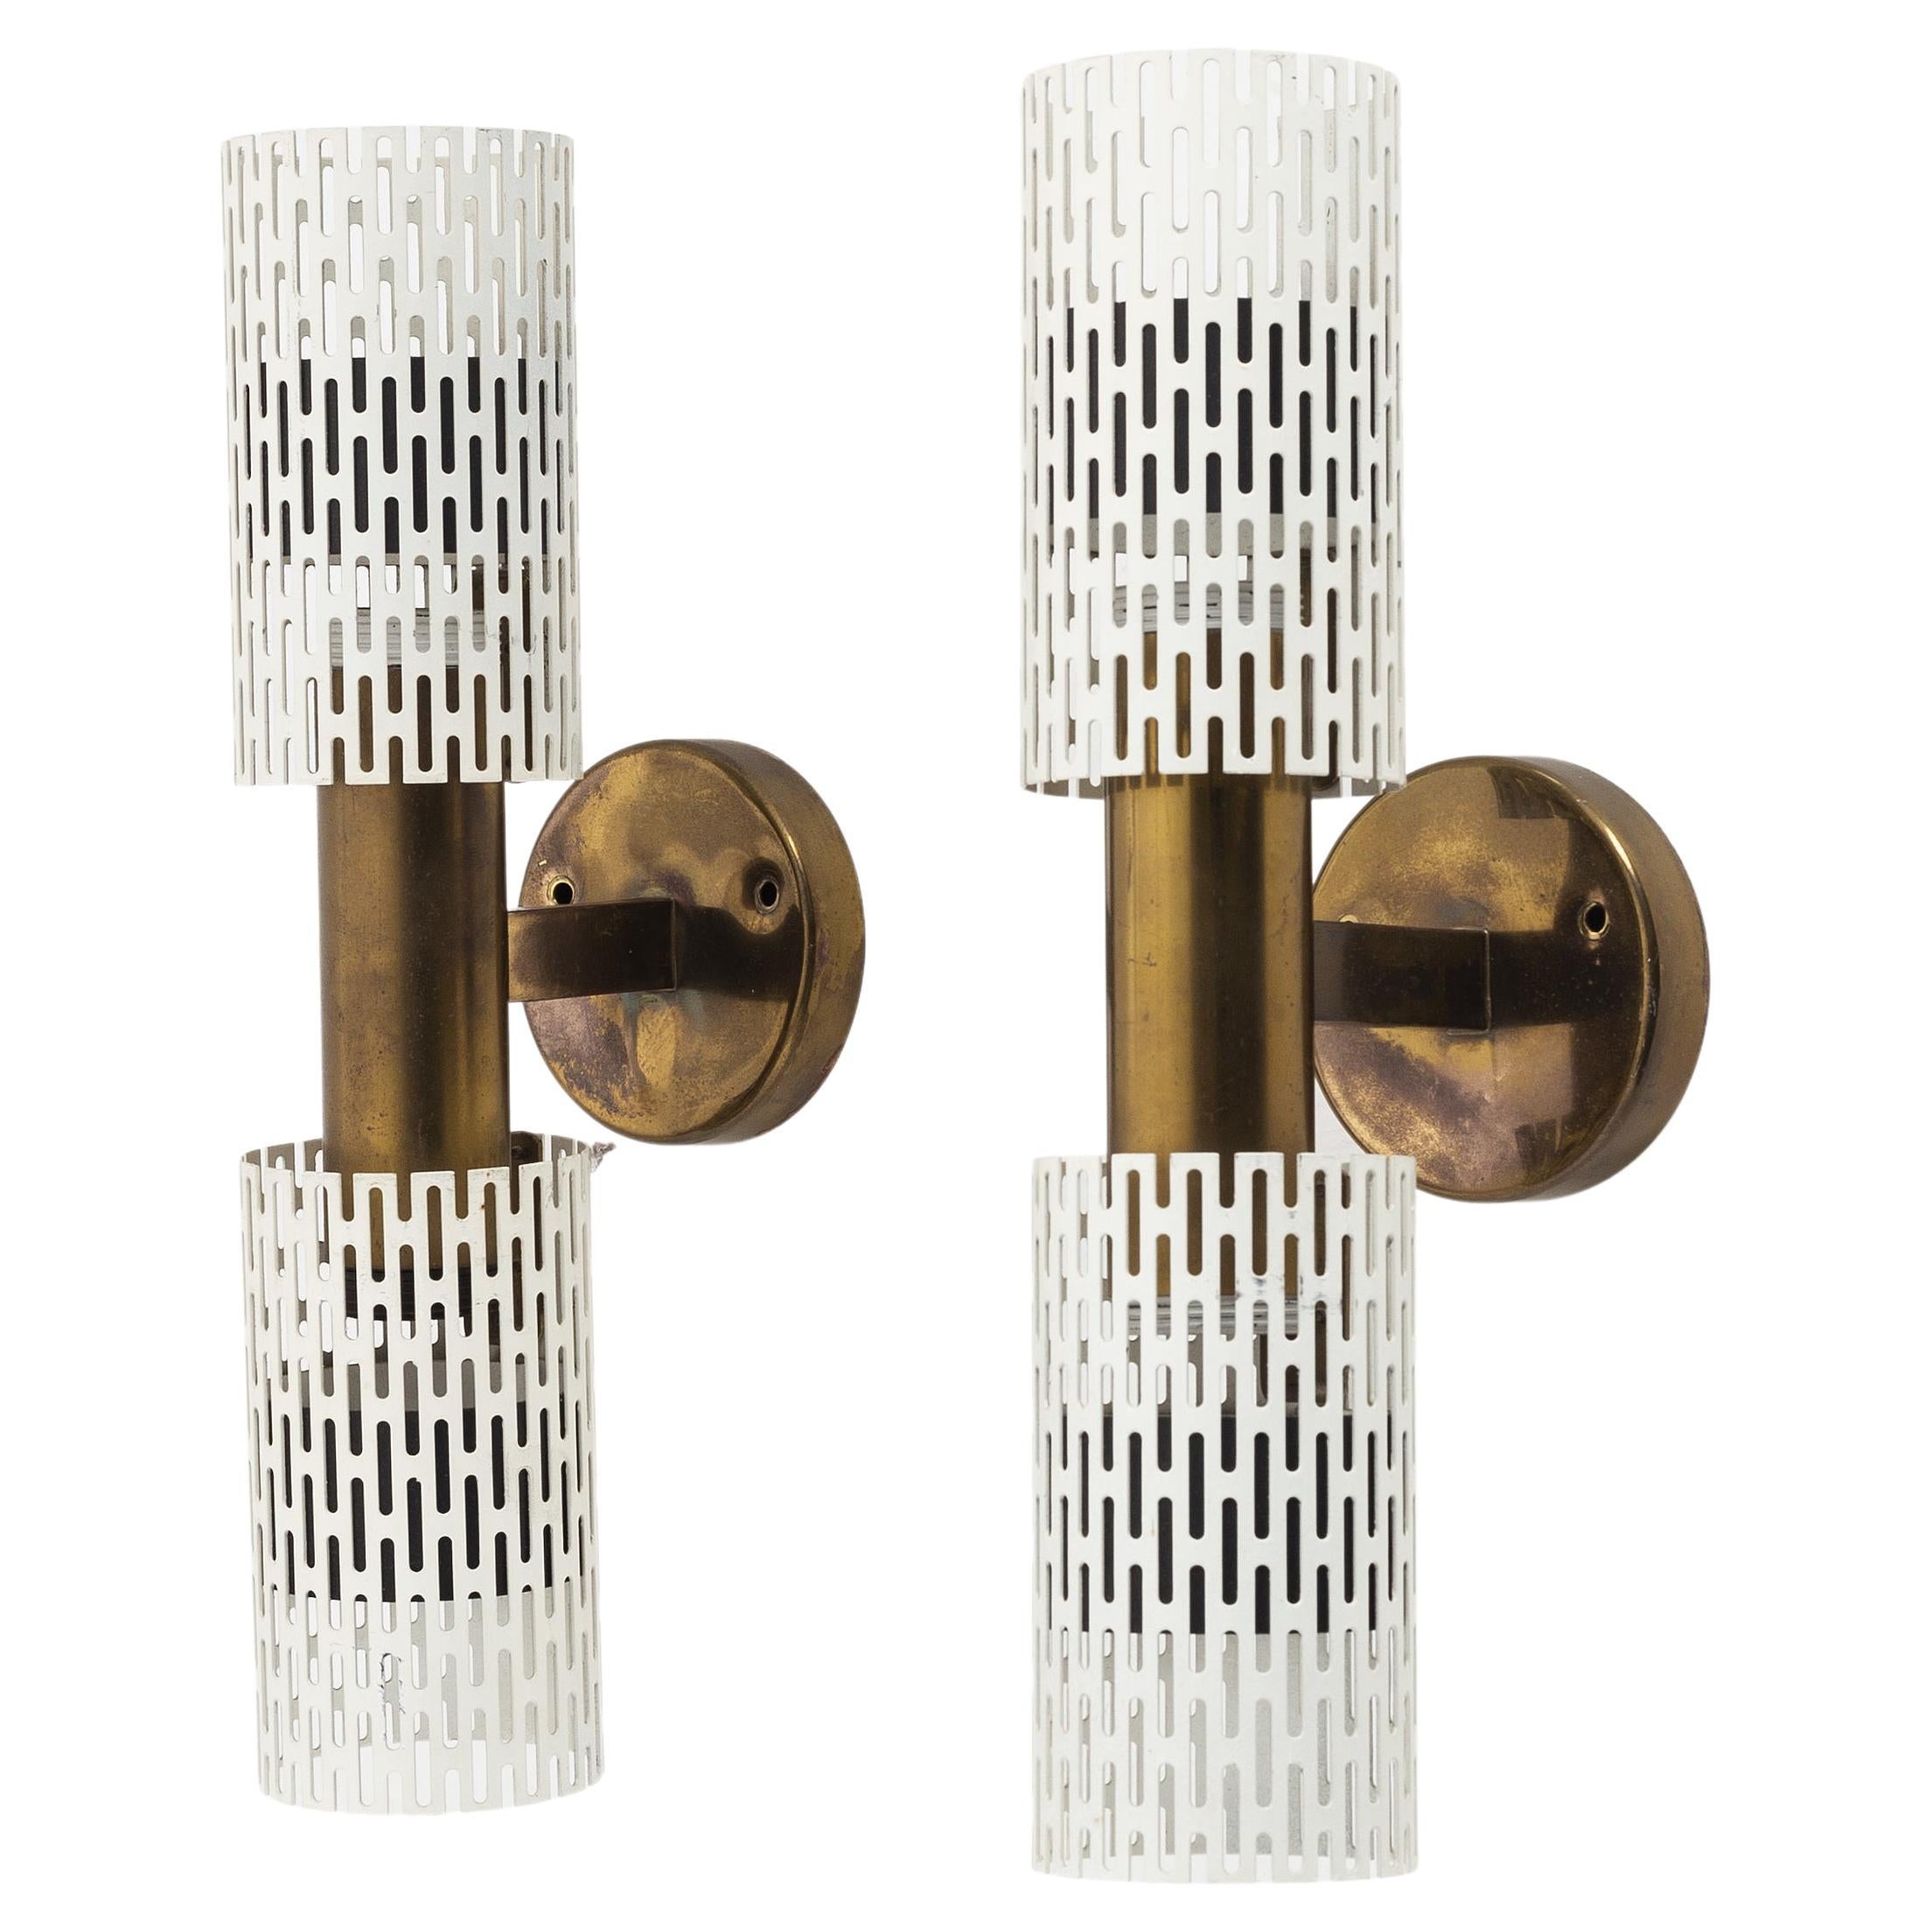 Harald Notini Rare Pair of Sconces Model 11262 for Bohlmarks, 1950